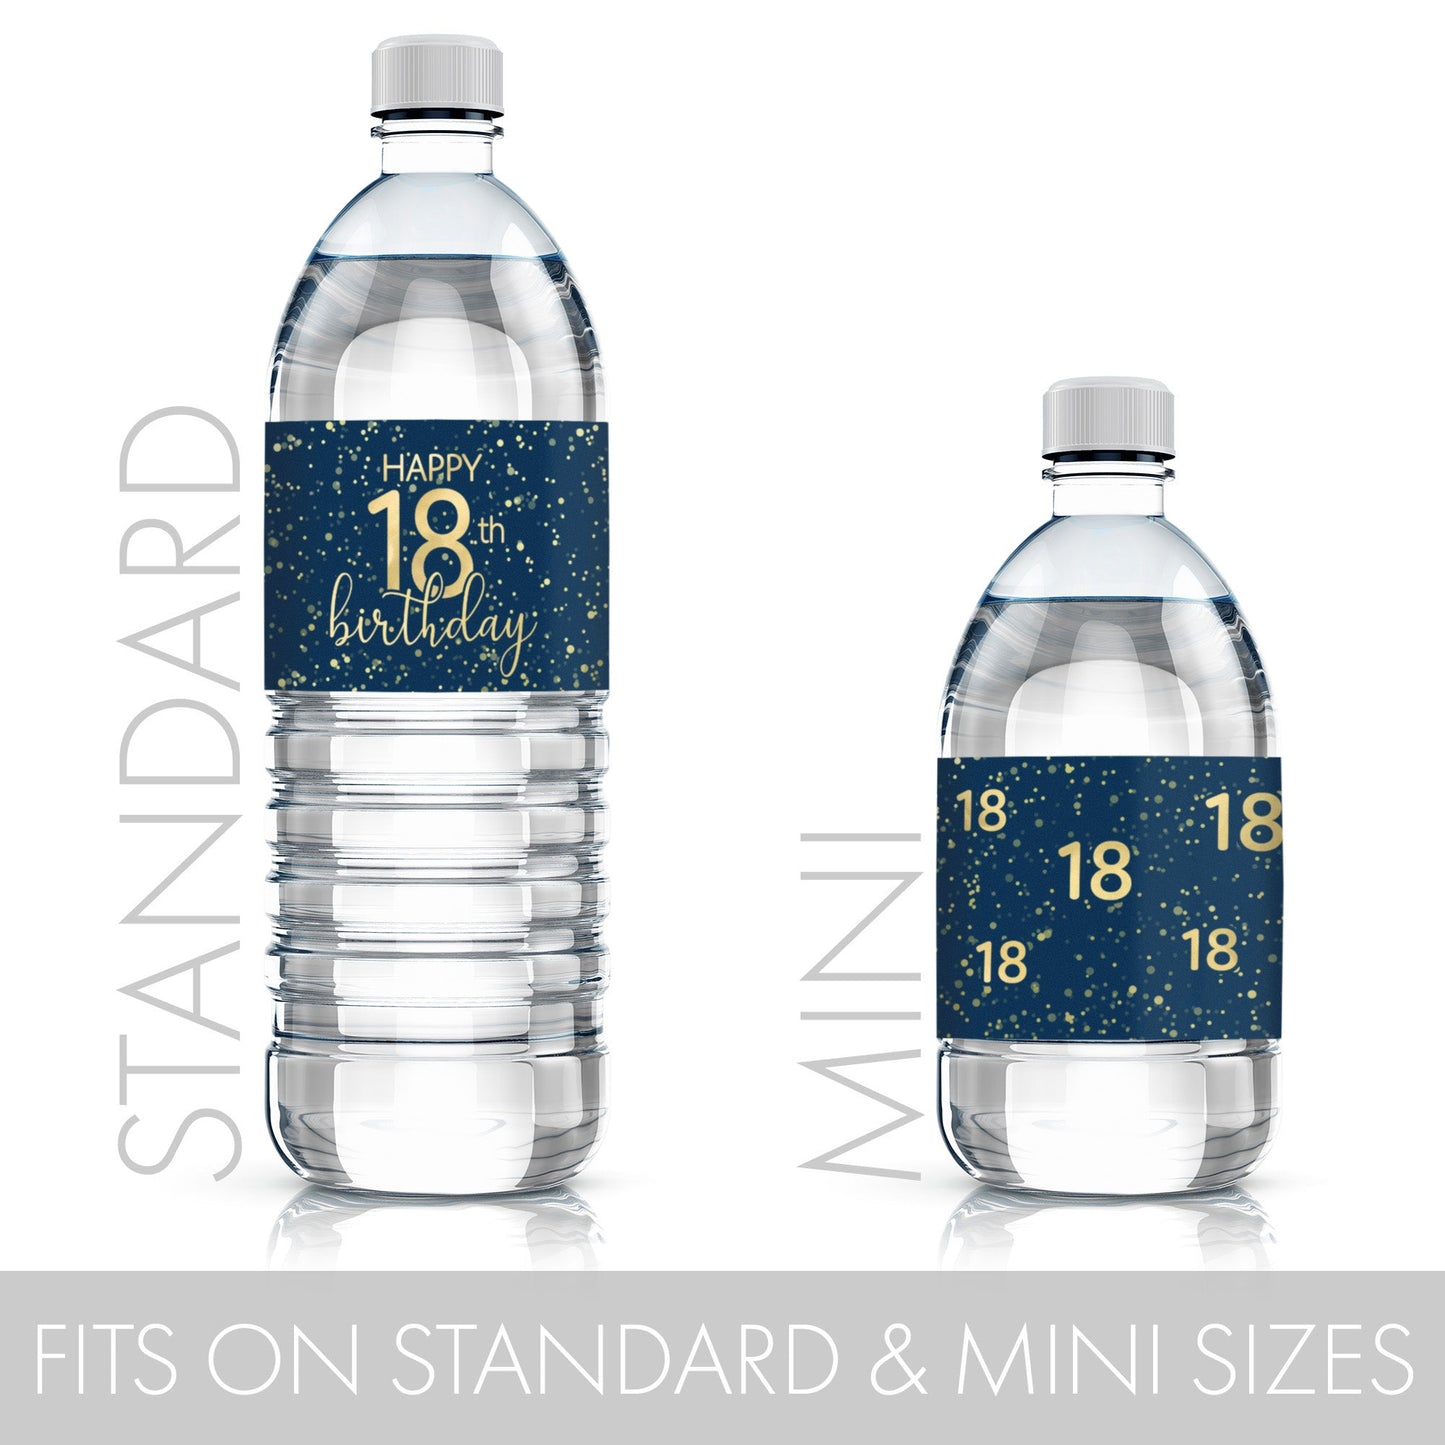 A group of water bottles with elegant navy blue and gold labels that are customized for an 18th birthday celebration, perfect for adding a personalized touch to any party.